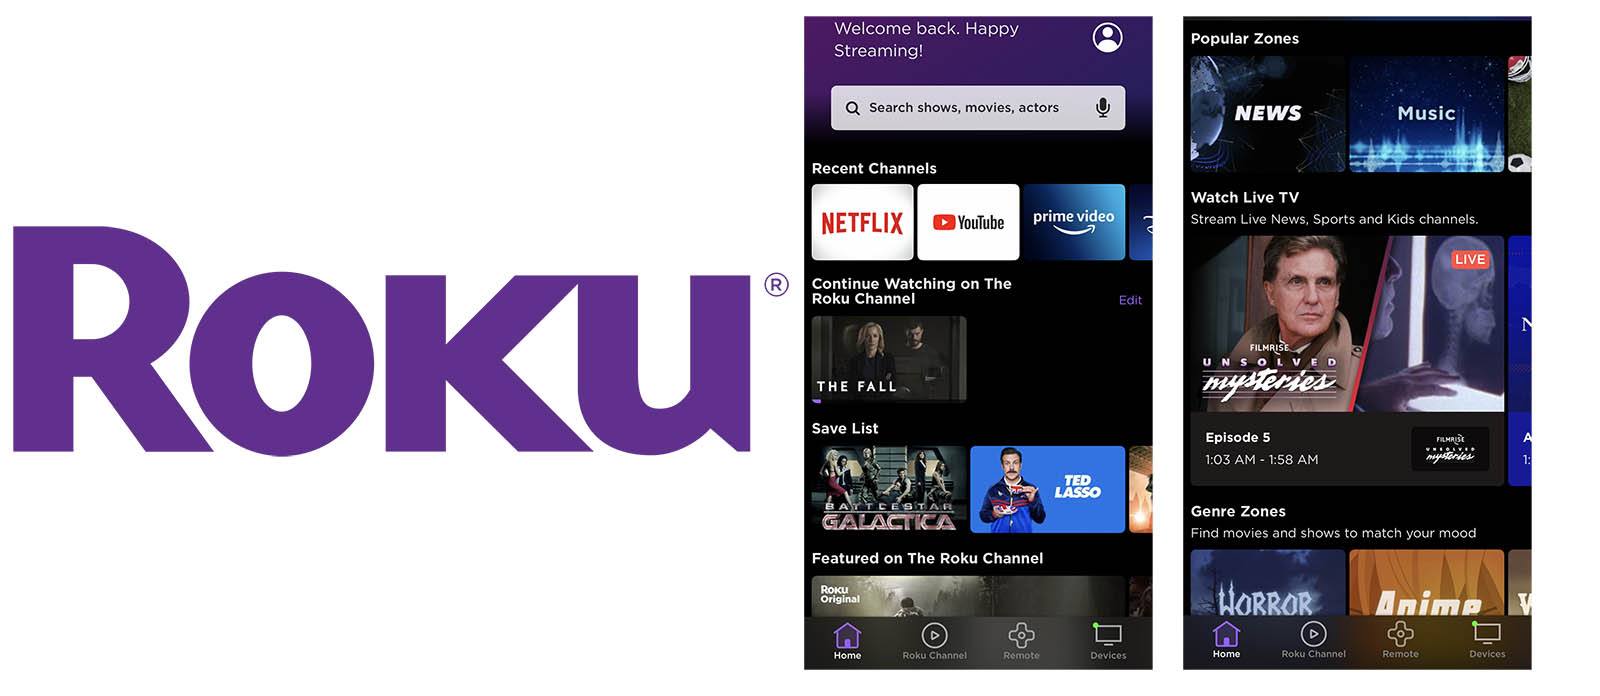 Collage of Roku logo and mobile app screenshots